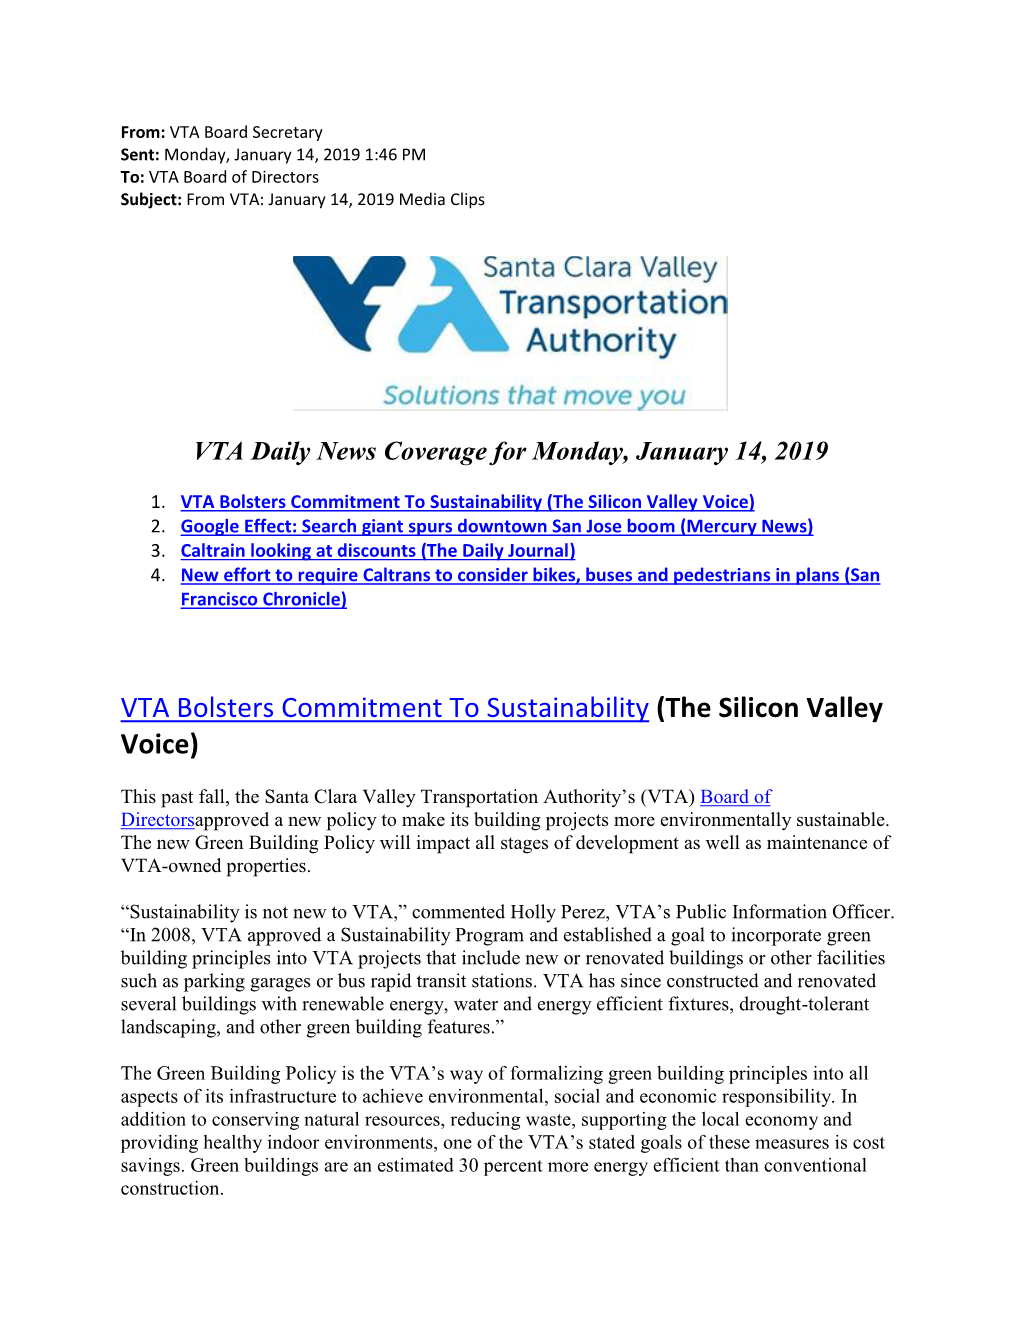 VTA Bolsters Commitment to Sustainability (The Silicon Valley Voice) 2